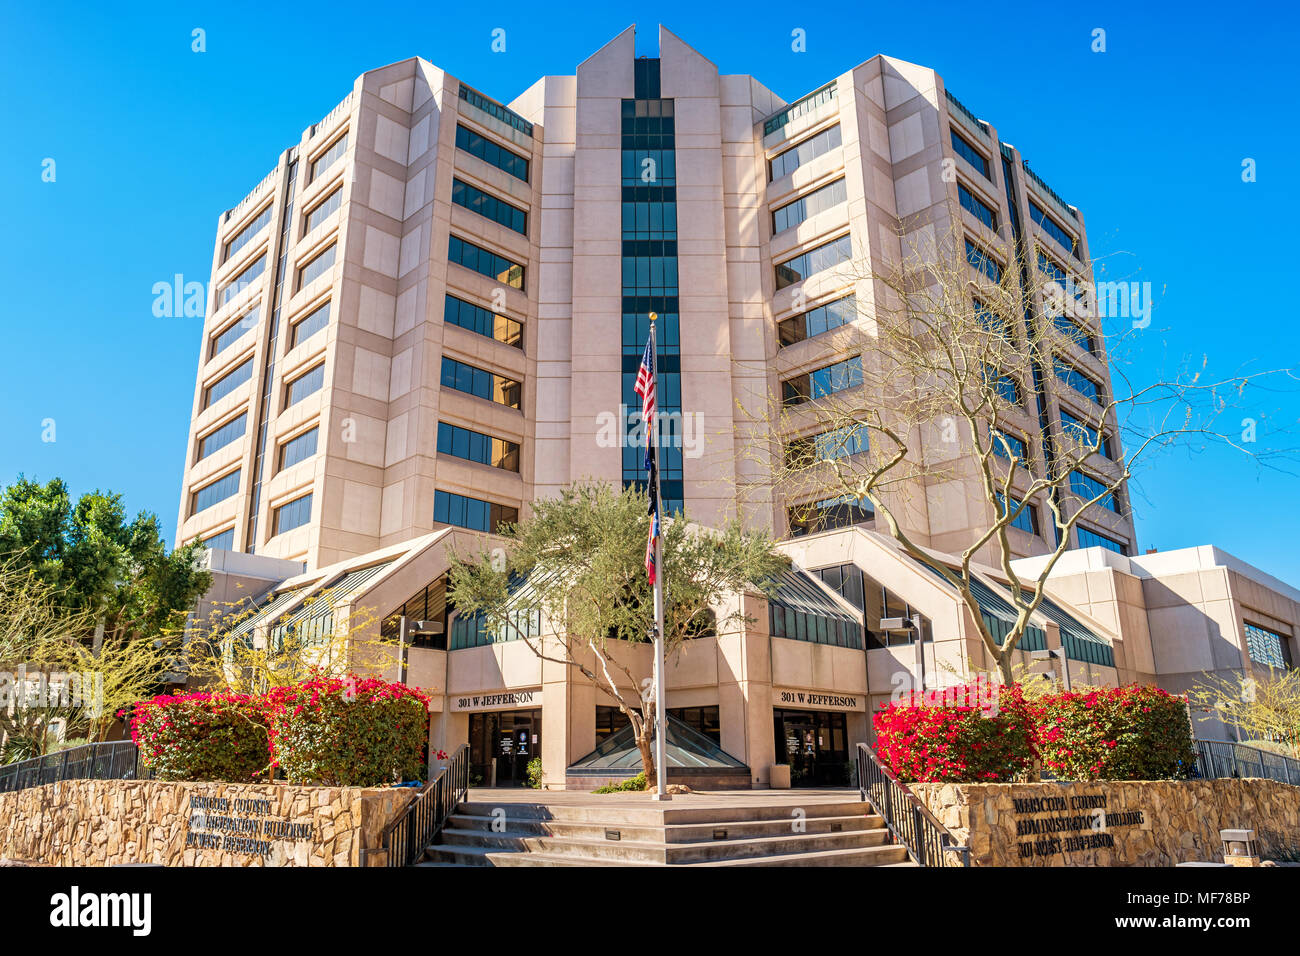 Stock photograph of the Maricopa County Administration Building in Phoenix Arizona USA on a sunny day. Stock Photo